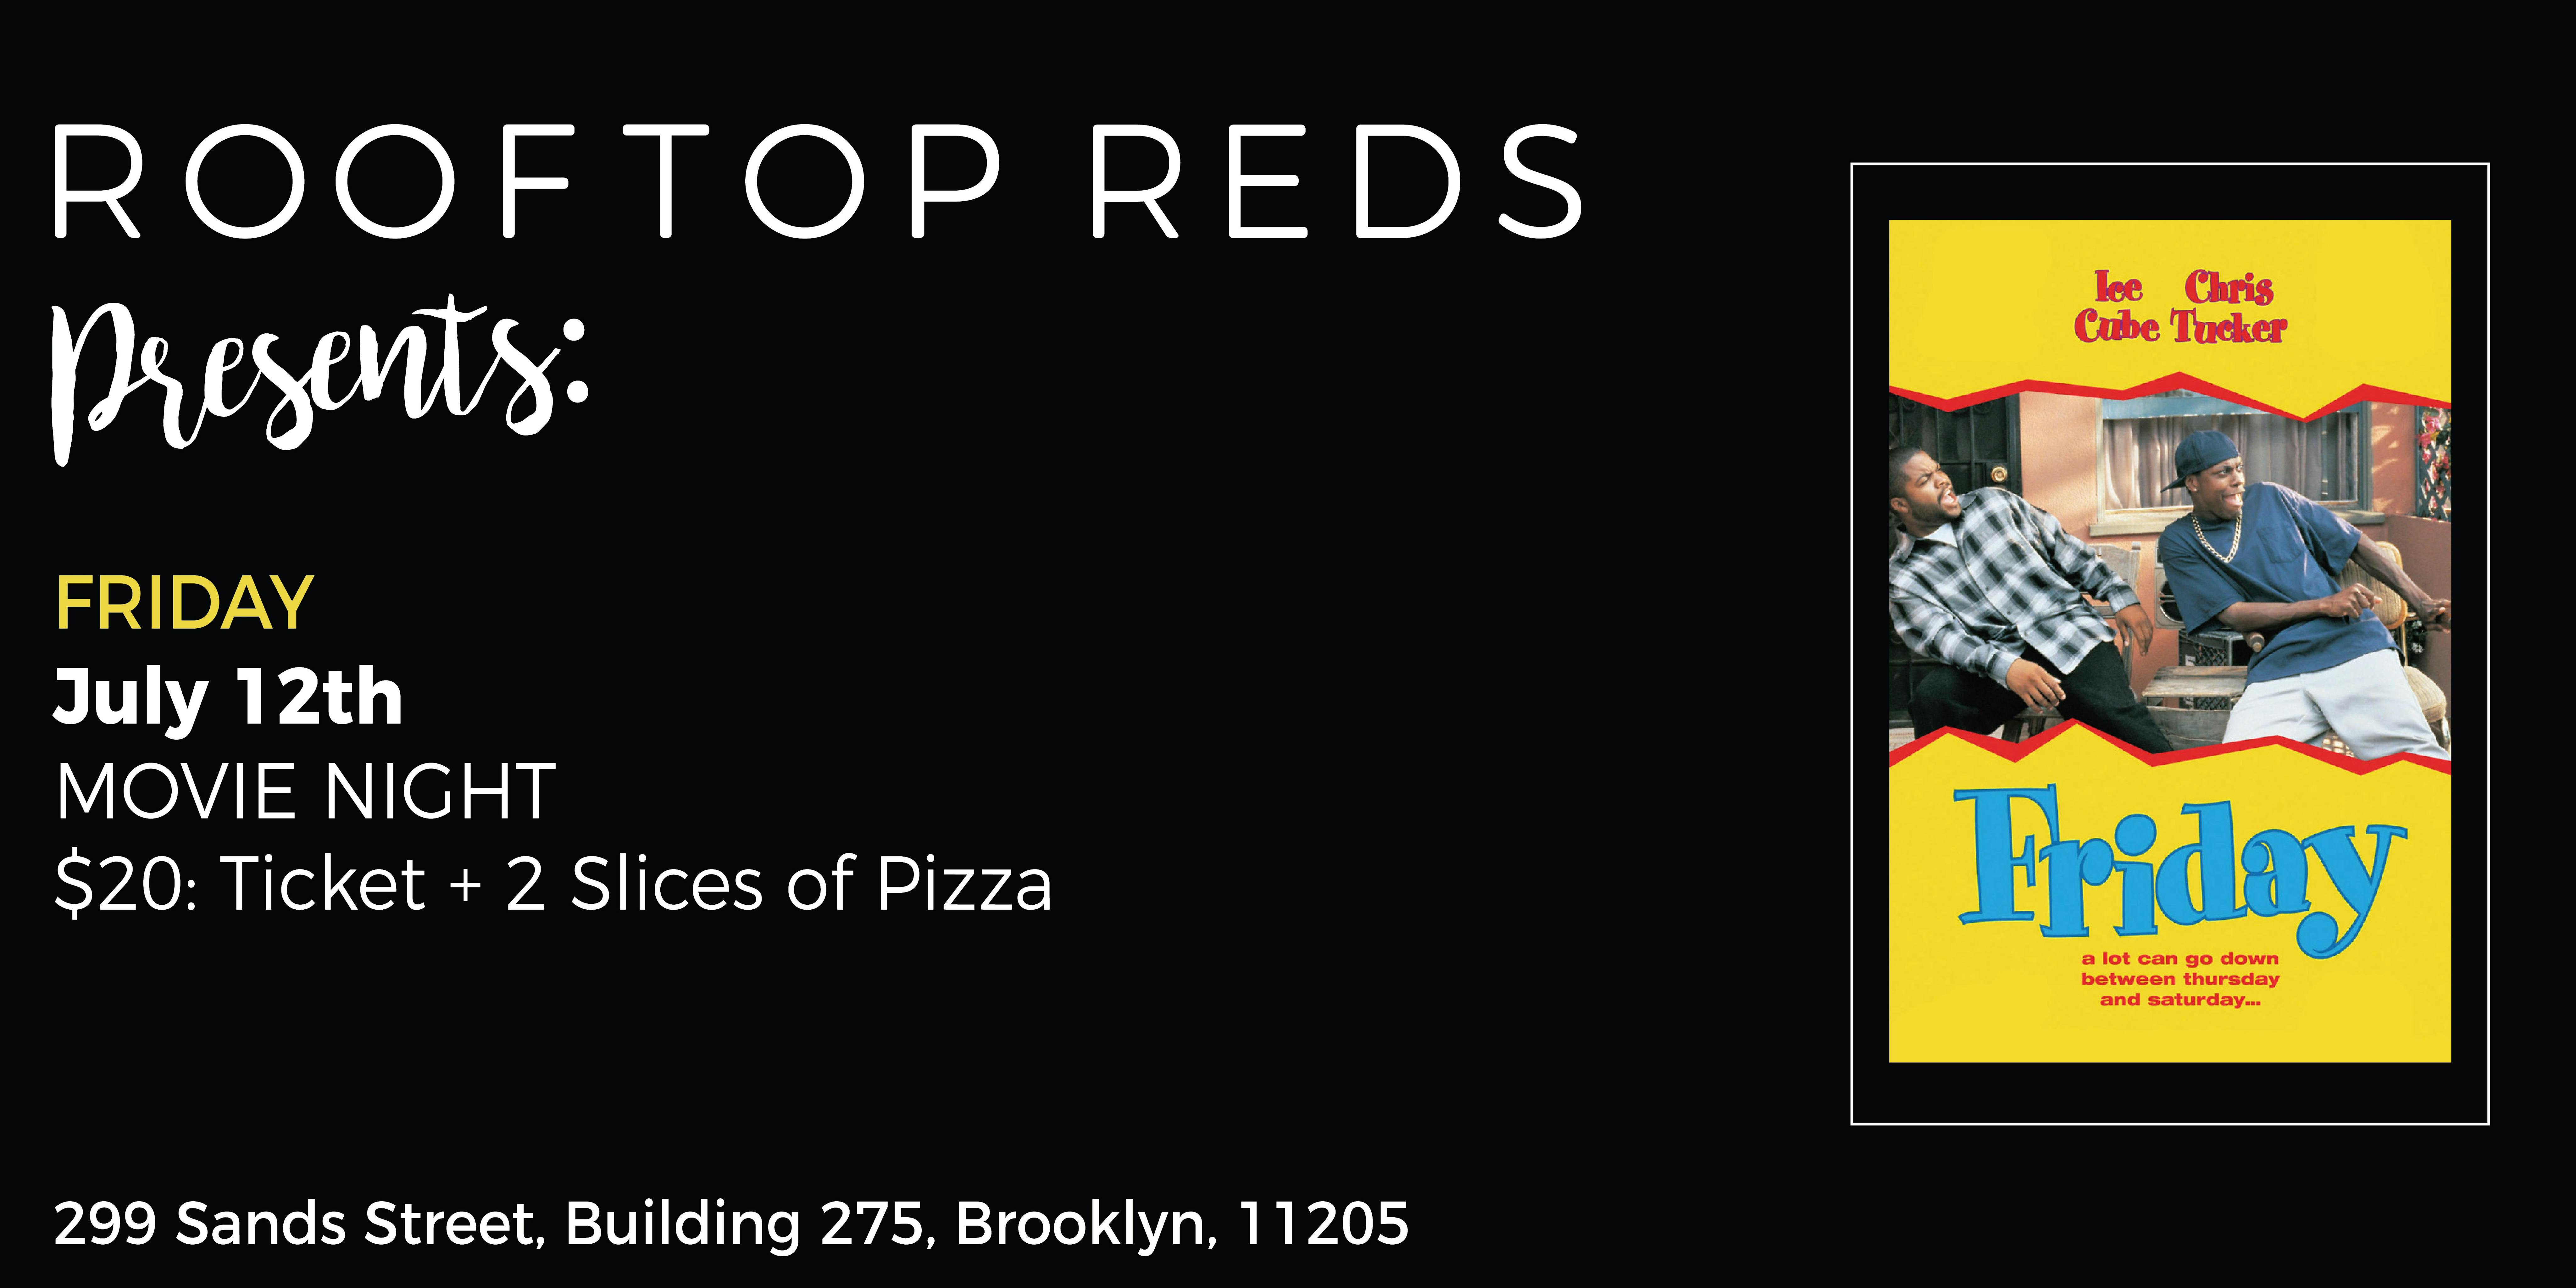 Rooftop Reds Presents: Friday